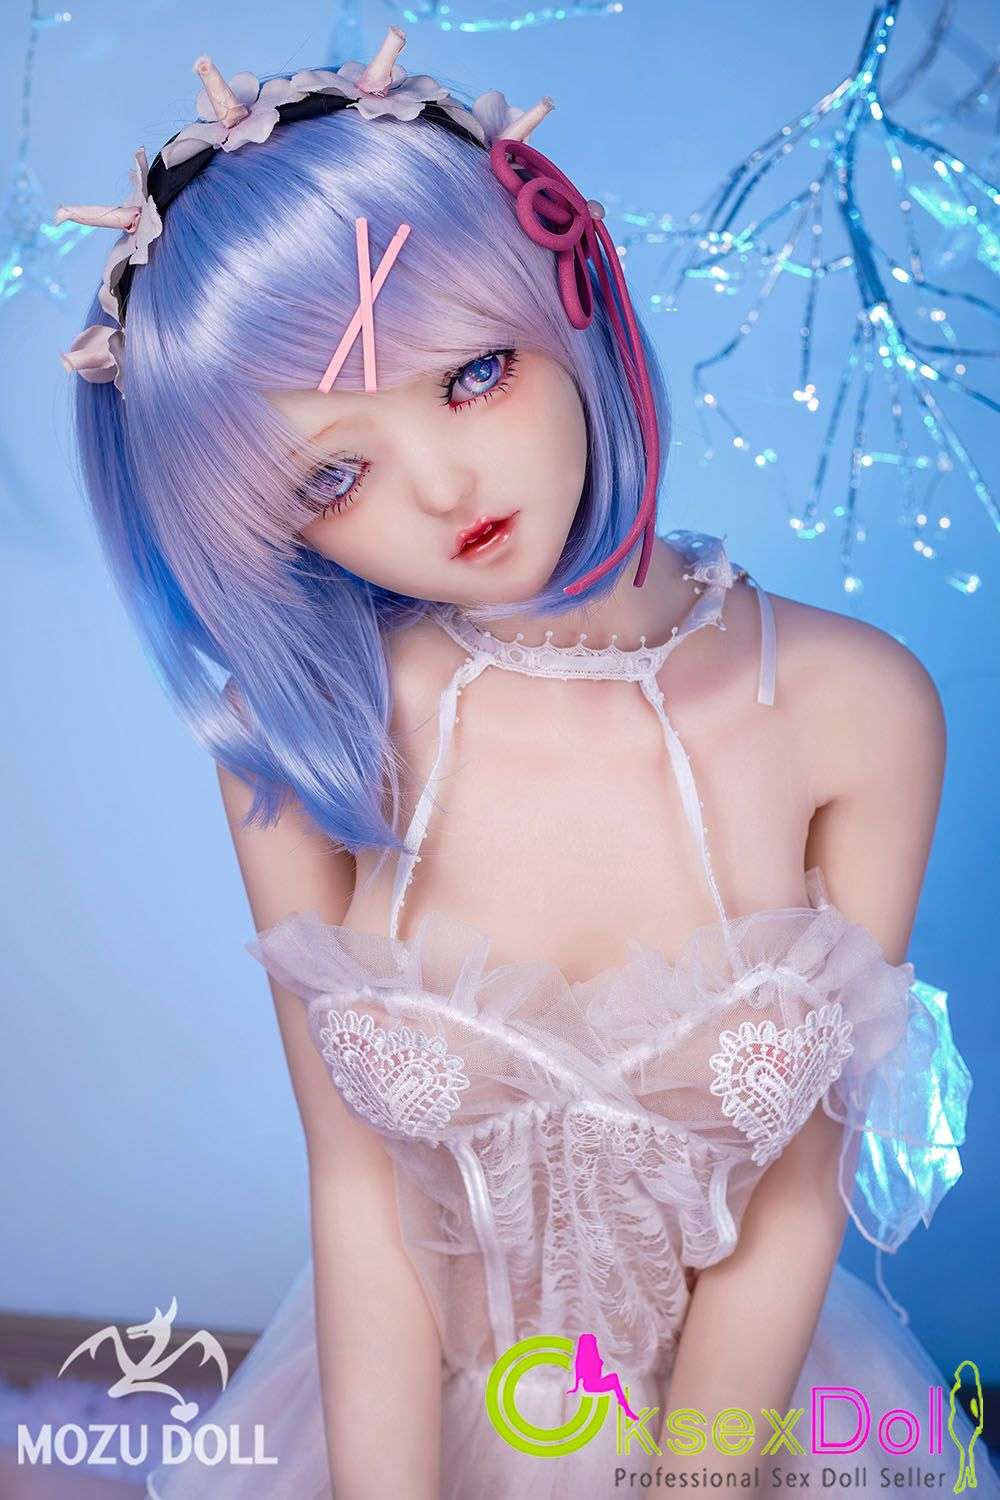 Anime Sex Doll Small Images of 『Maiya』